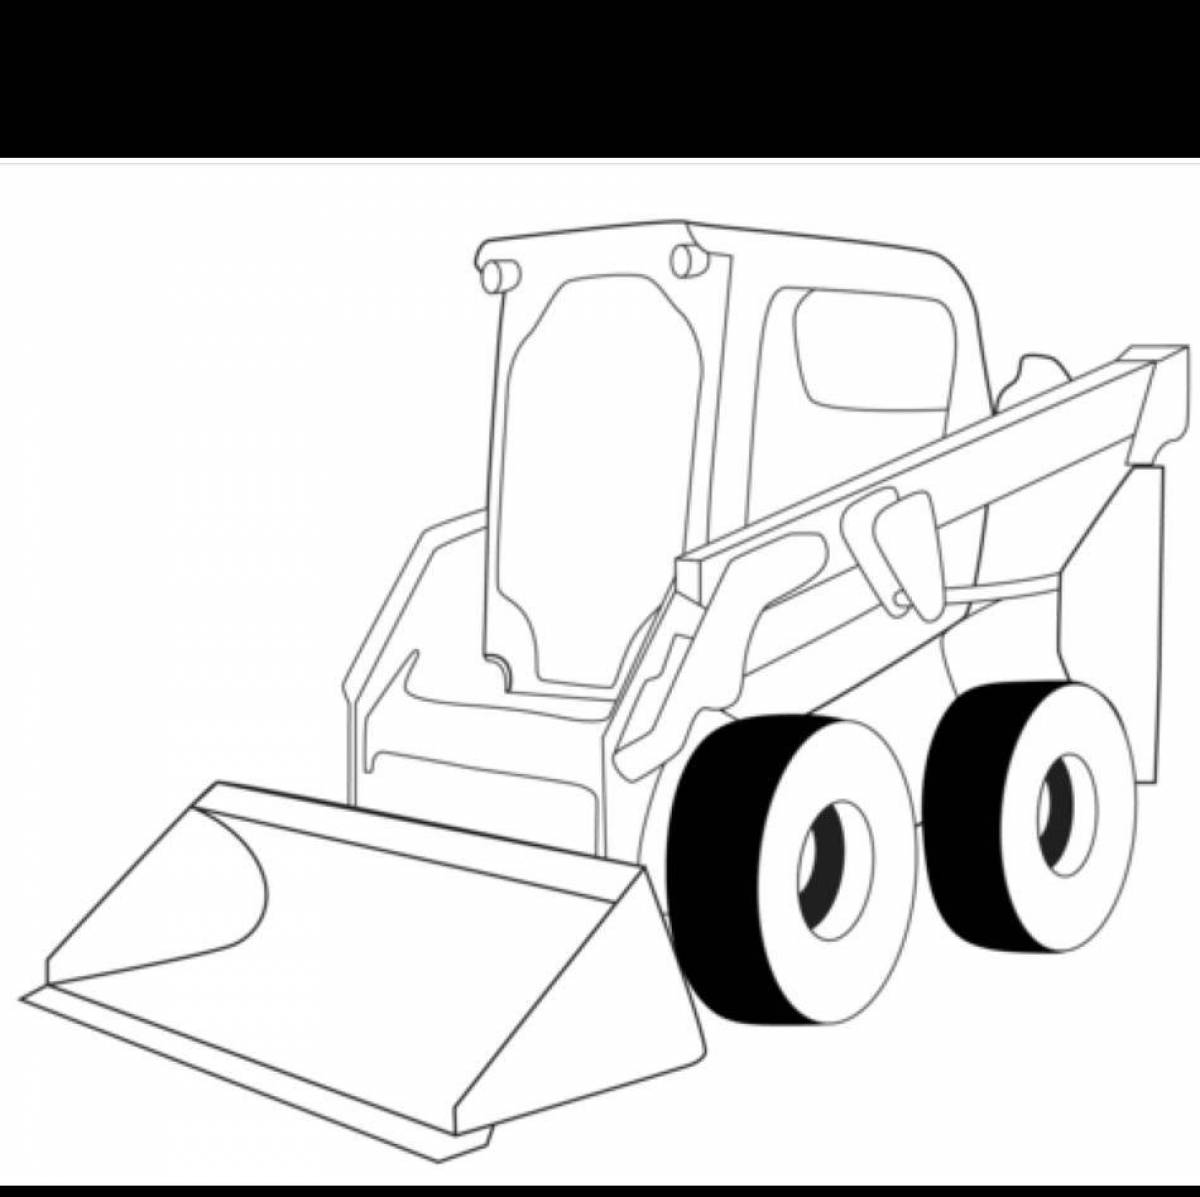 Awesome snowplow coloring page